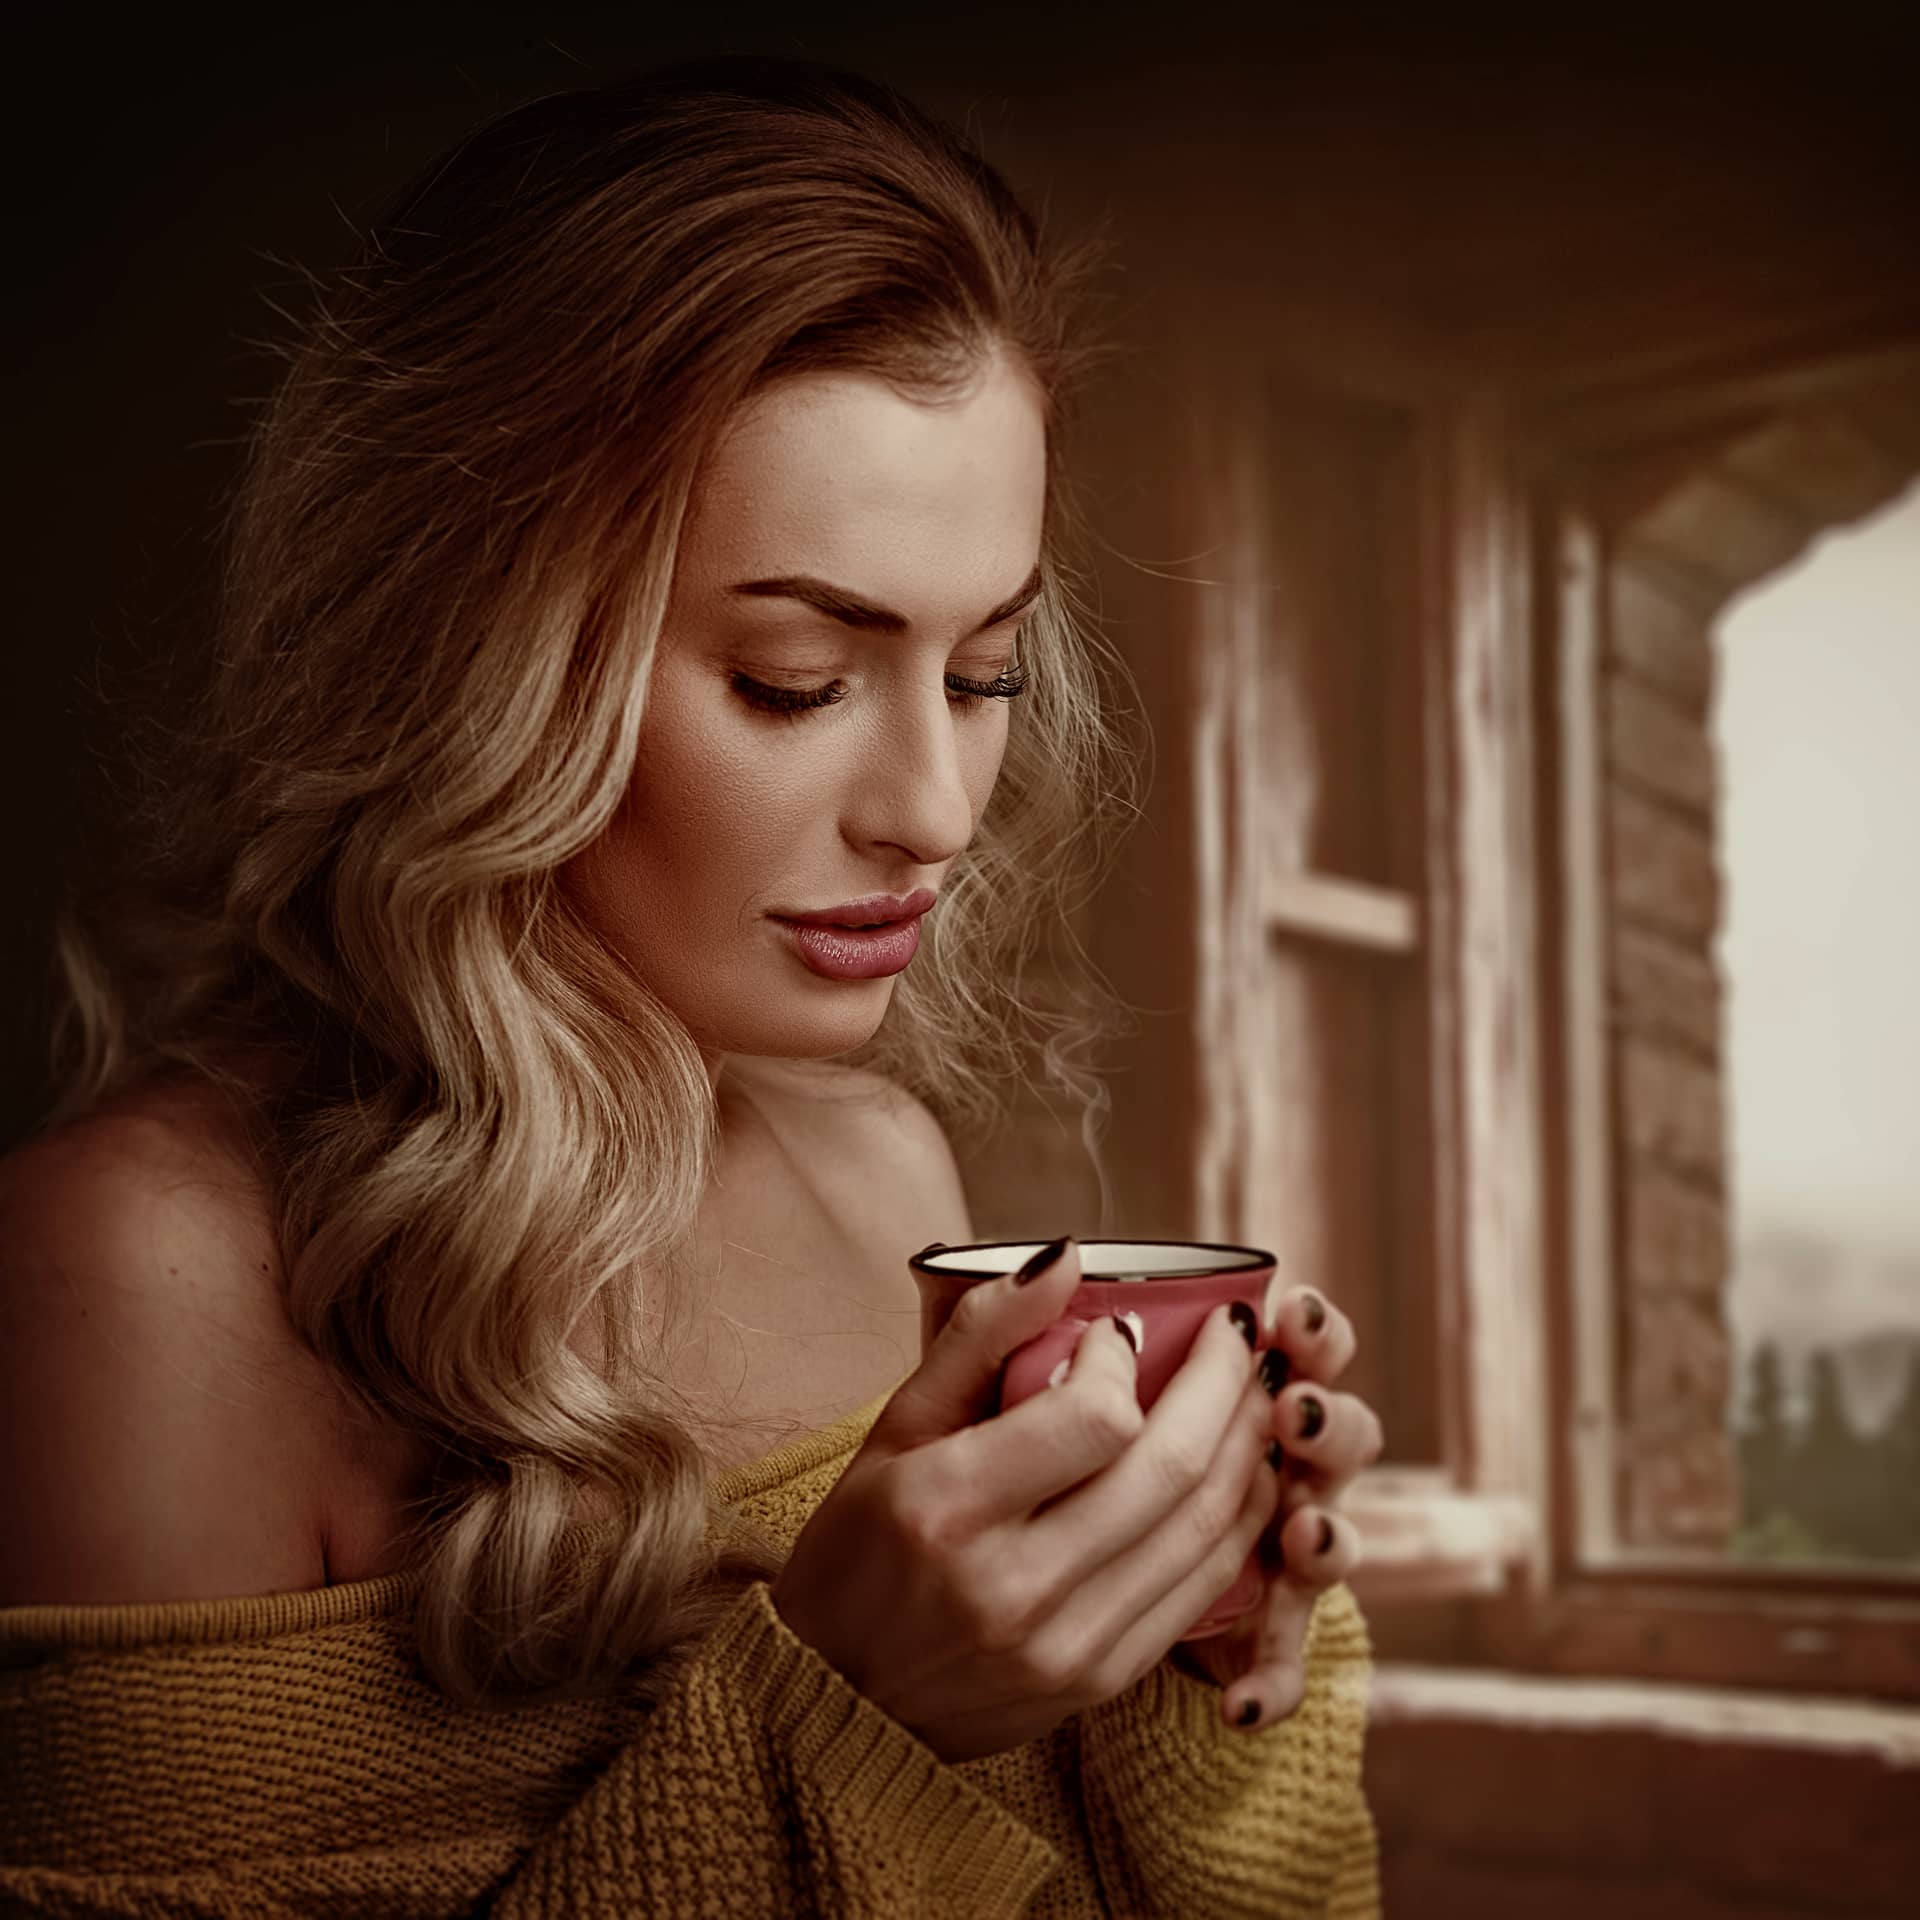 Morning with scented coffee beauty female portrait with cup drink